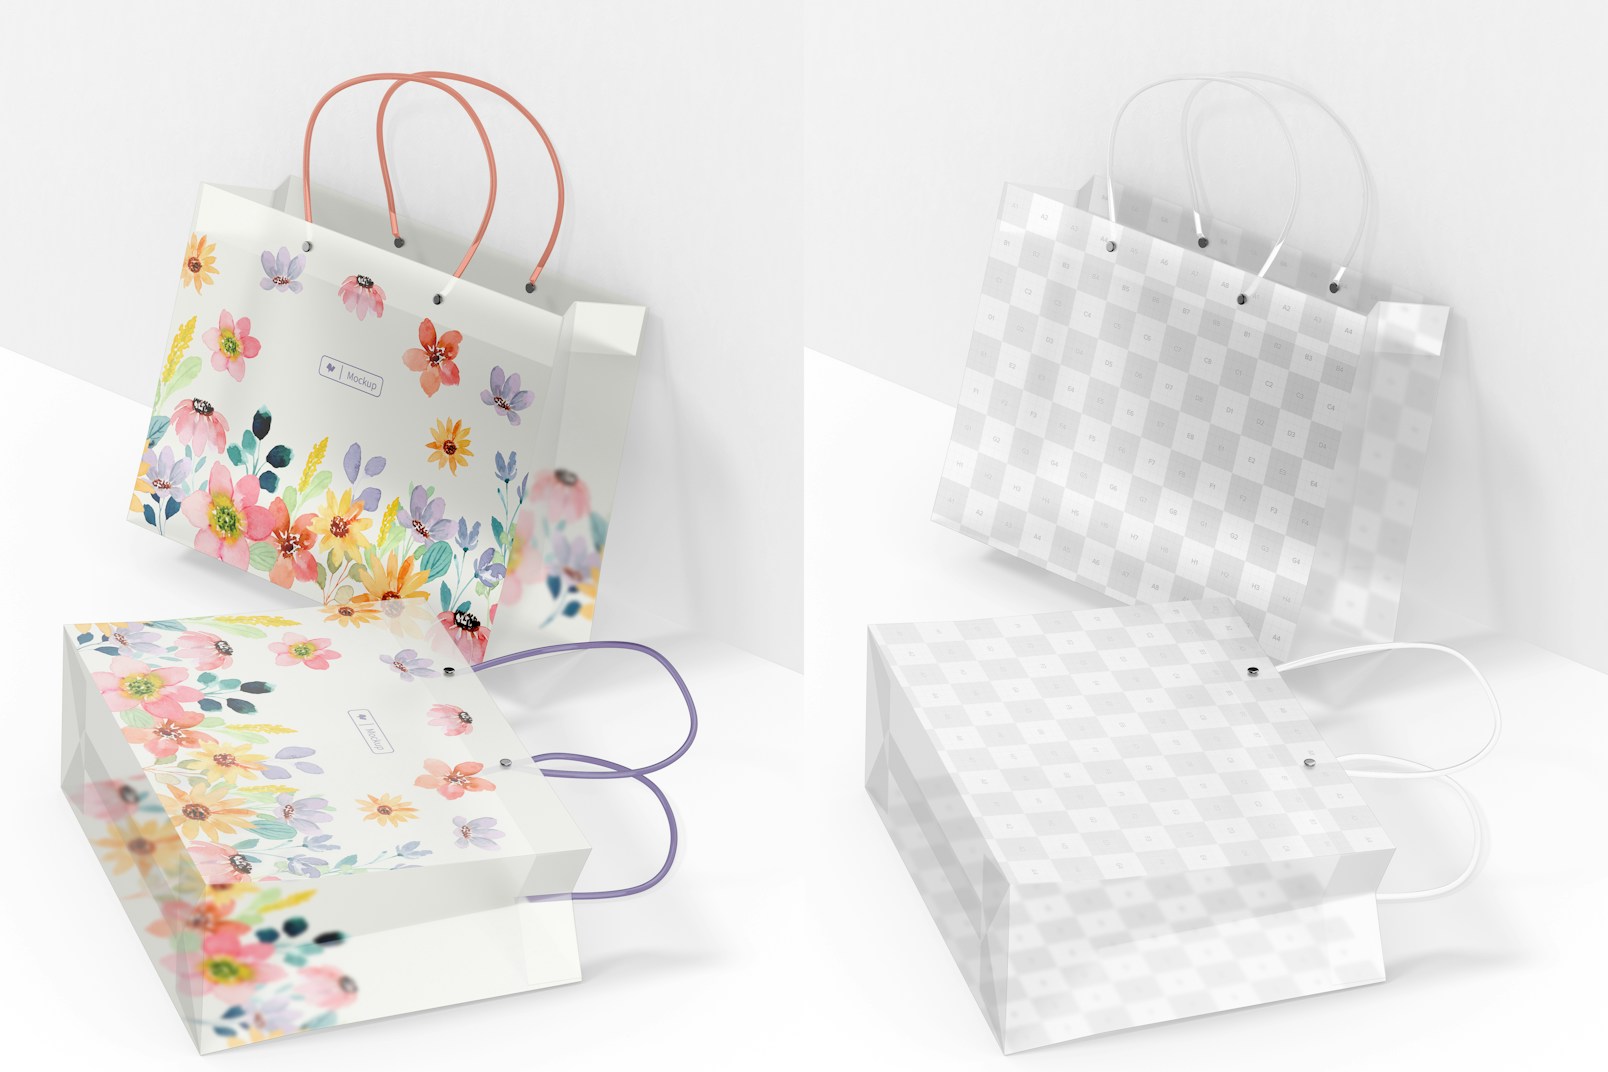 Clear Shopping Bags Mockup, Leaned and Dropped